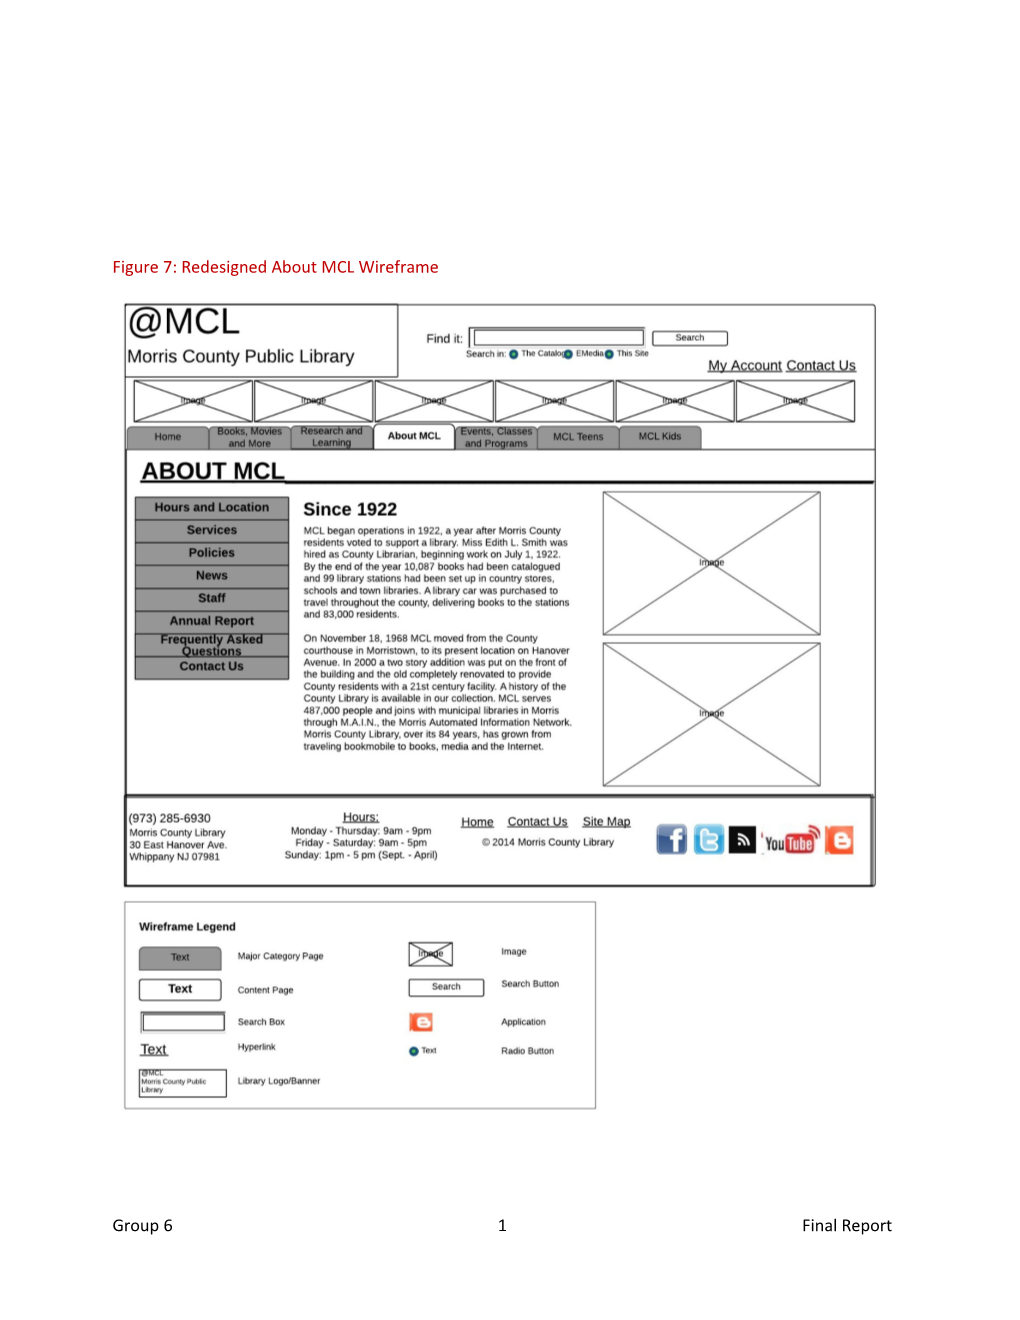 Figure 7: Redesigned About MCL Wireframe